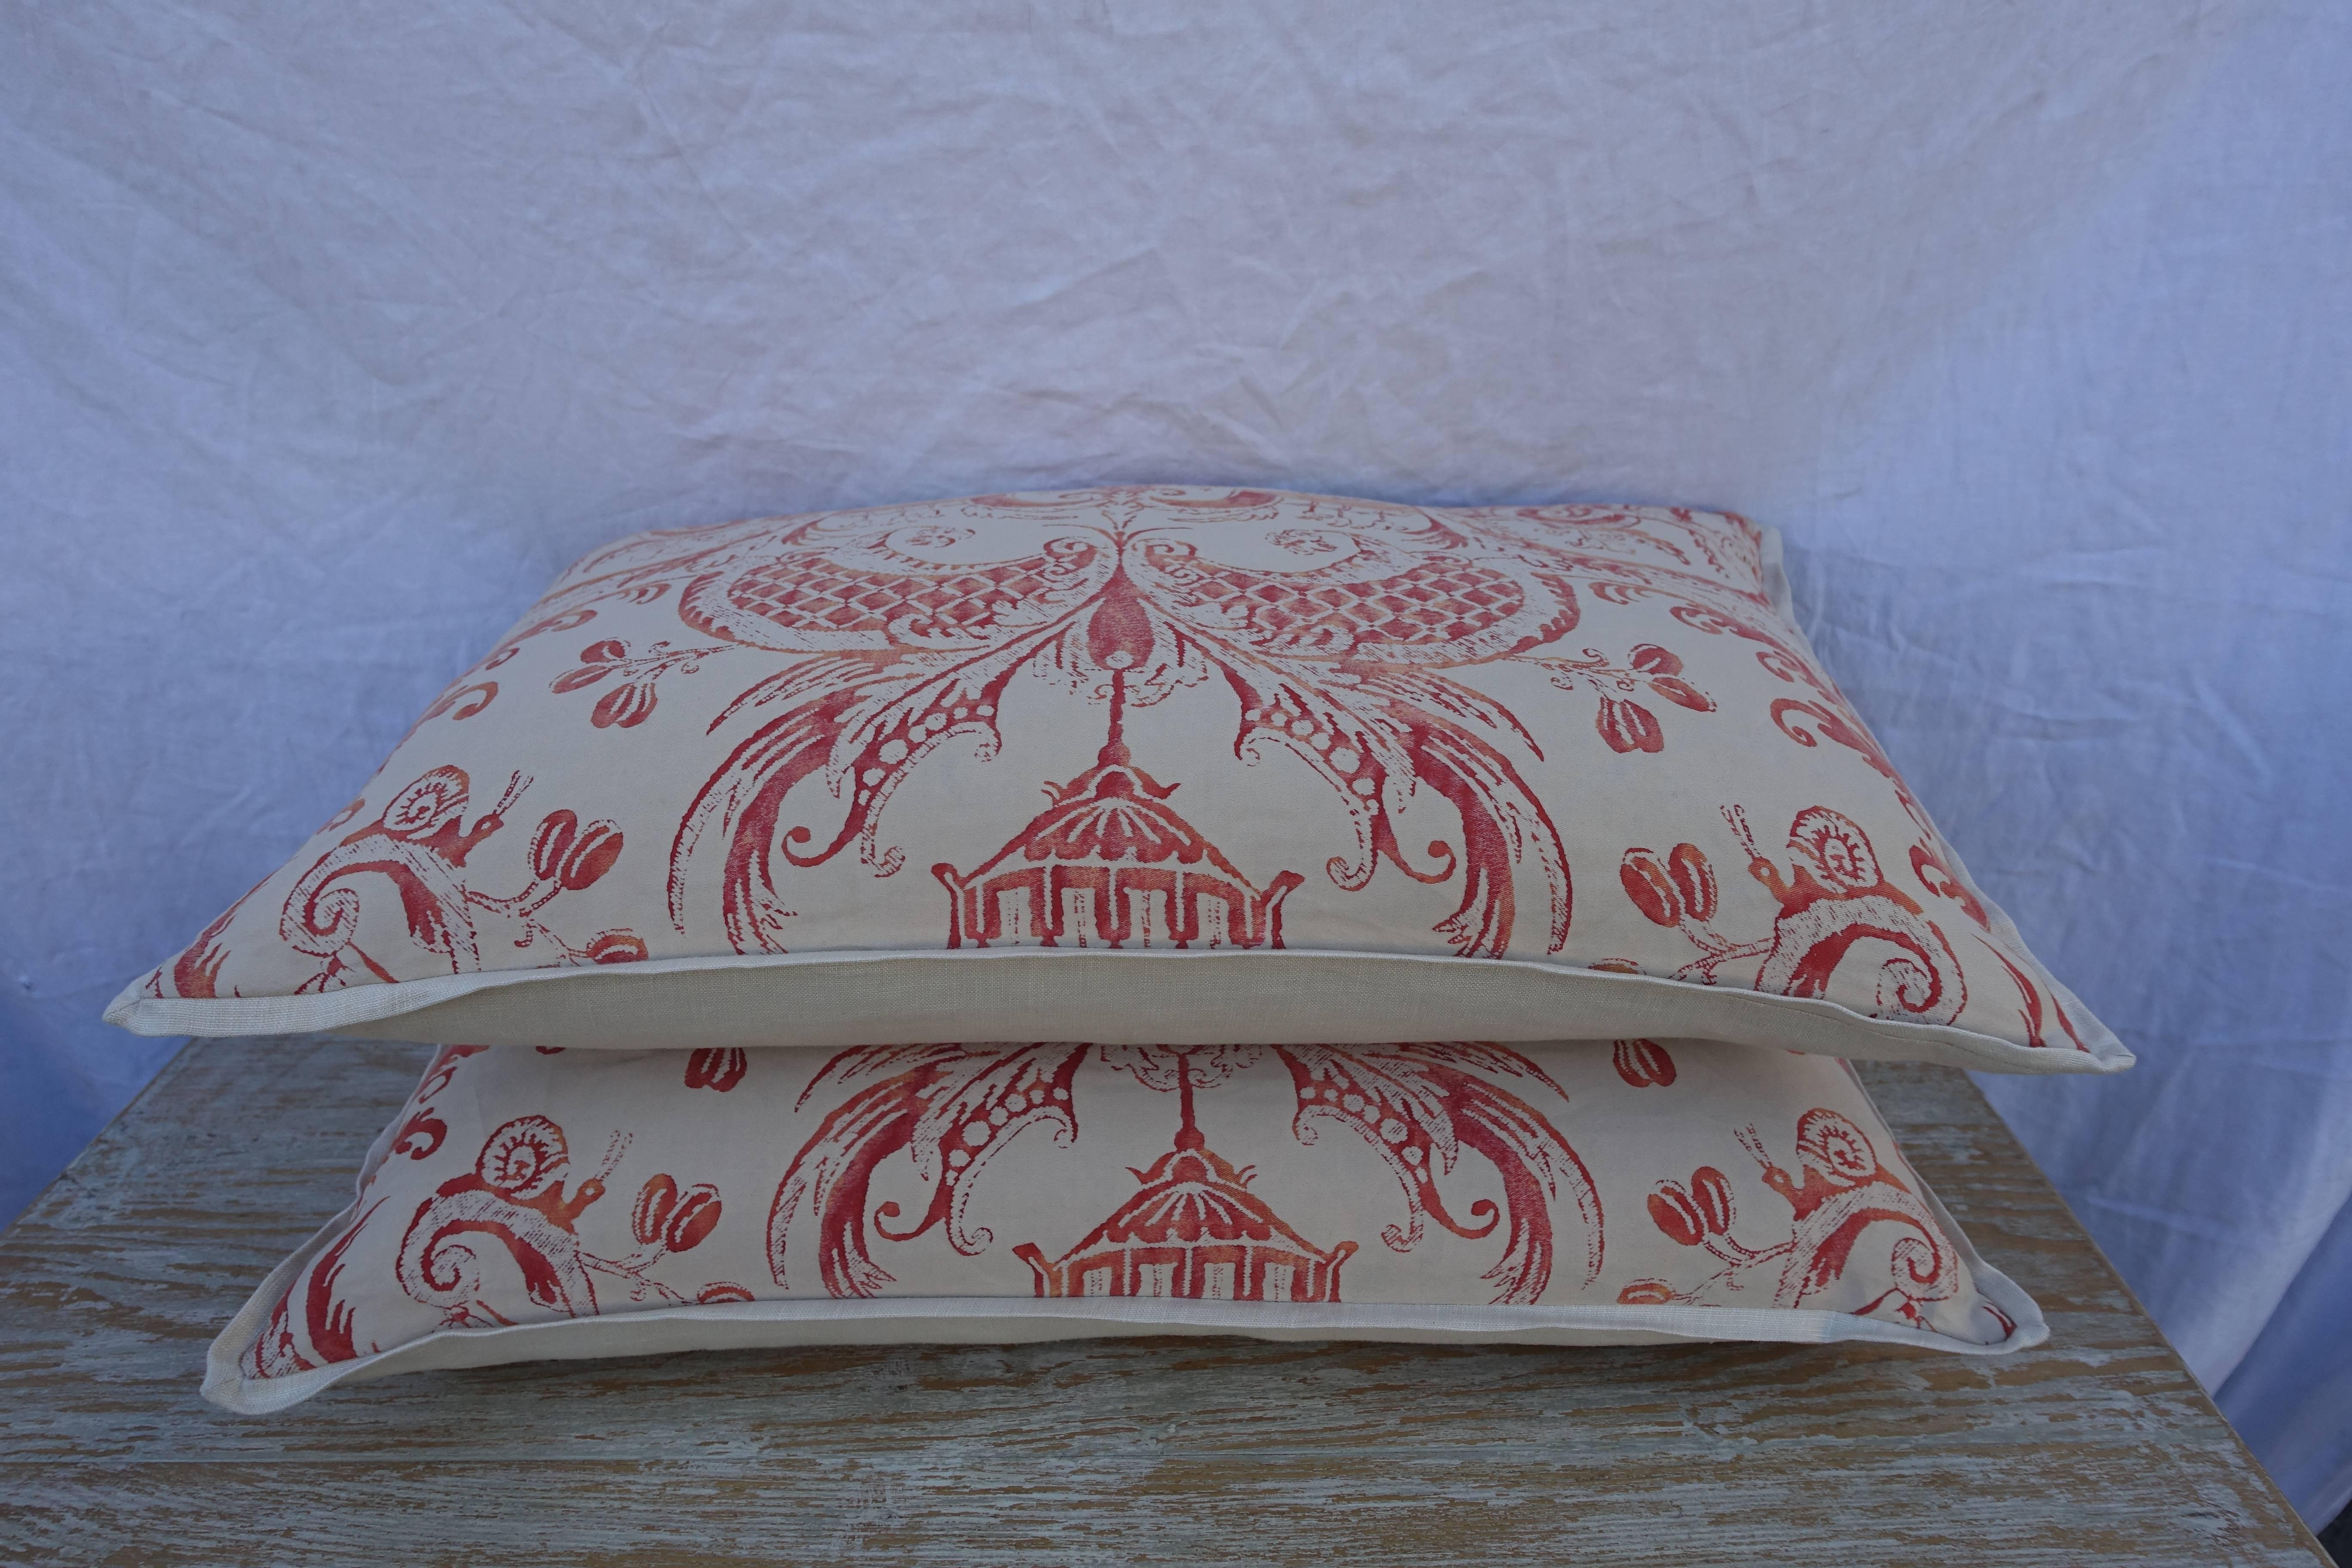 Pair of Manziano patterned Fortuny pillows in tangerine and cream coloration with cream colored linen backs and self welt detail. Down and feather inserts, sewn closed.